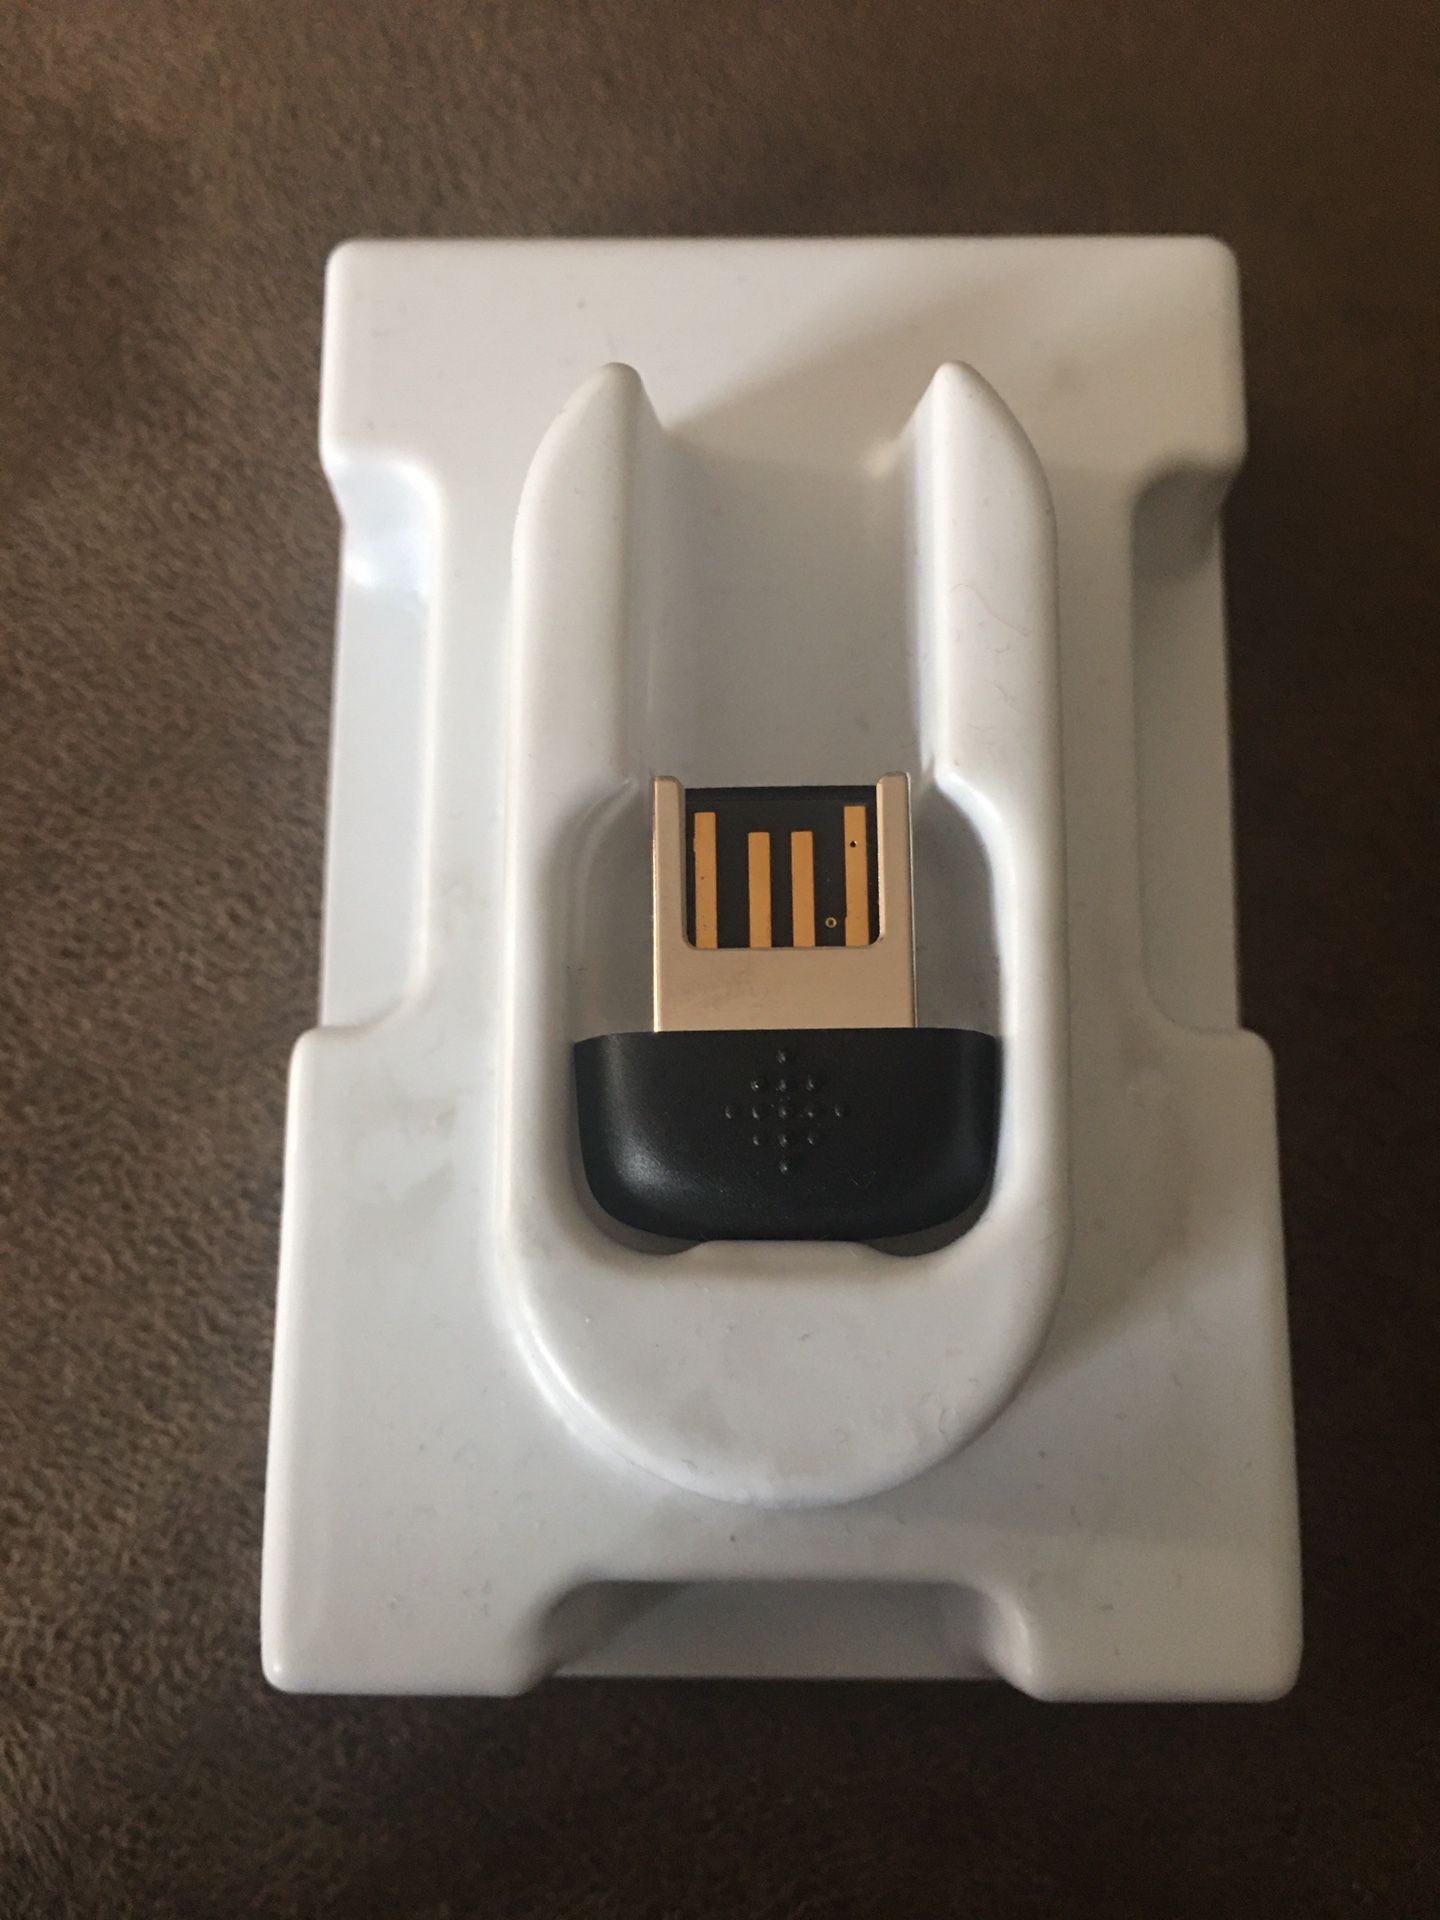 Fitbit Dongle